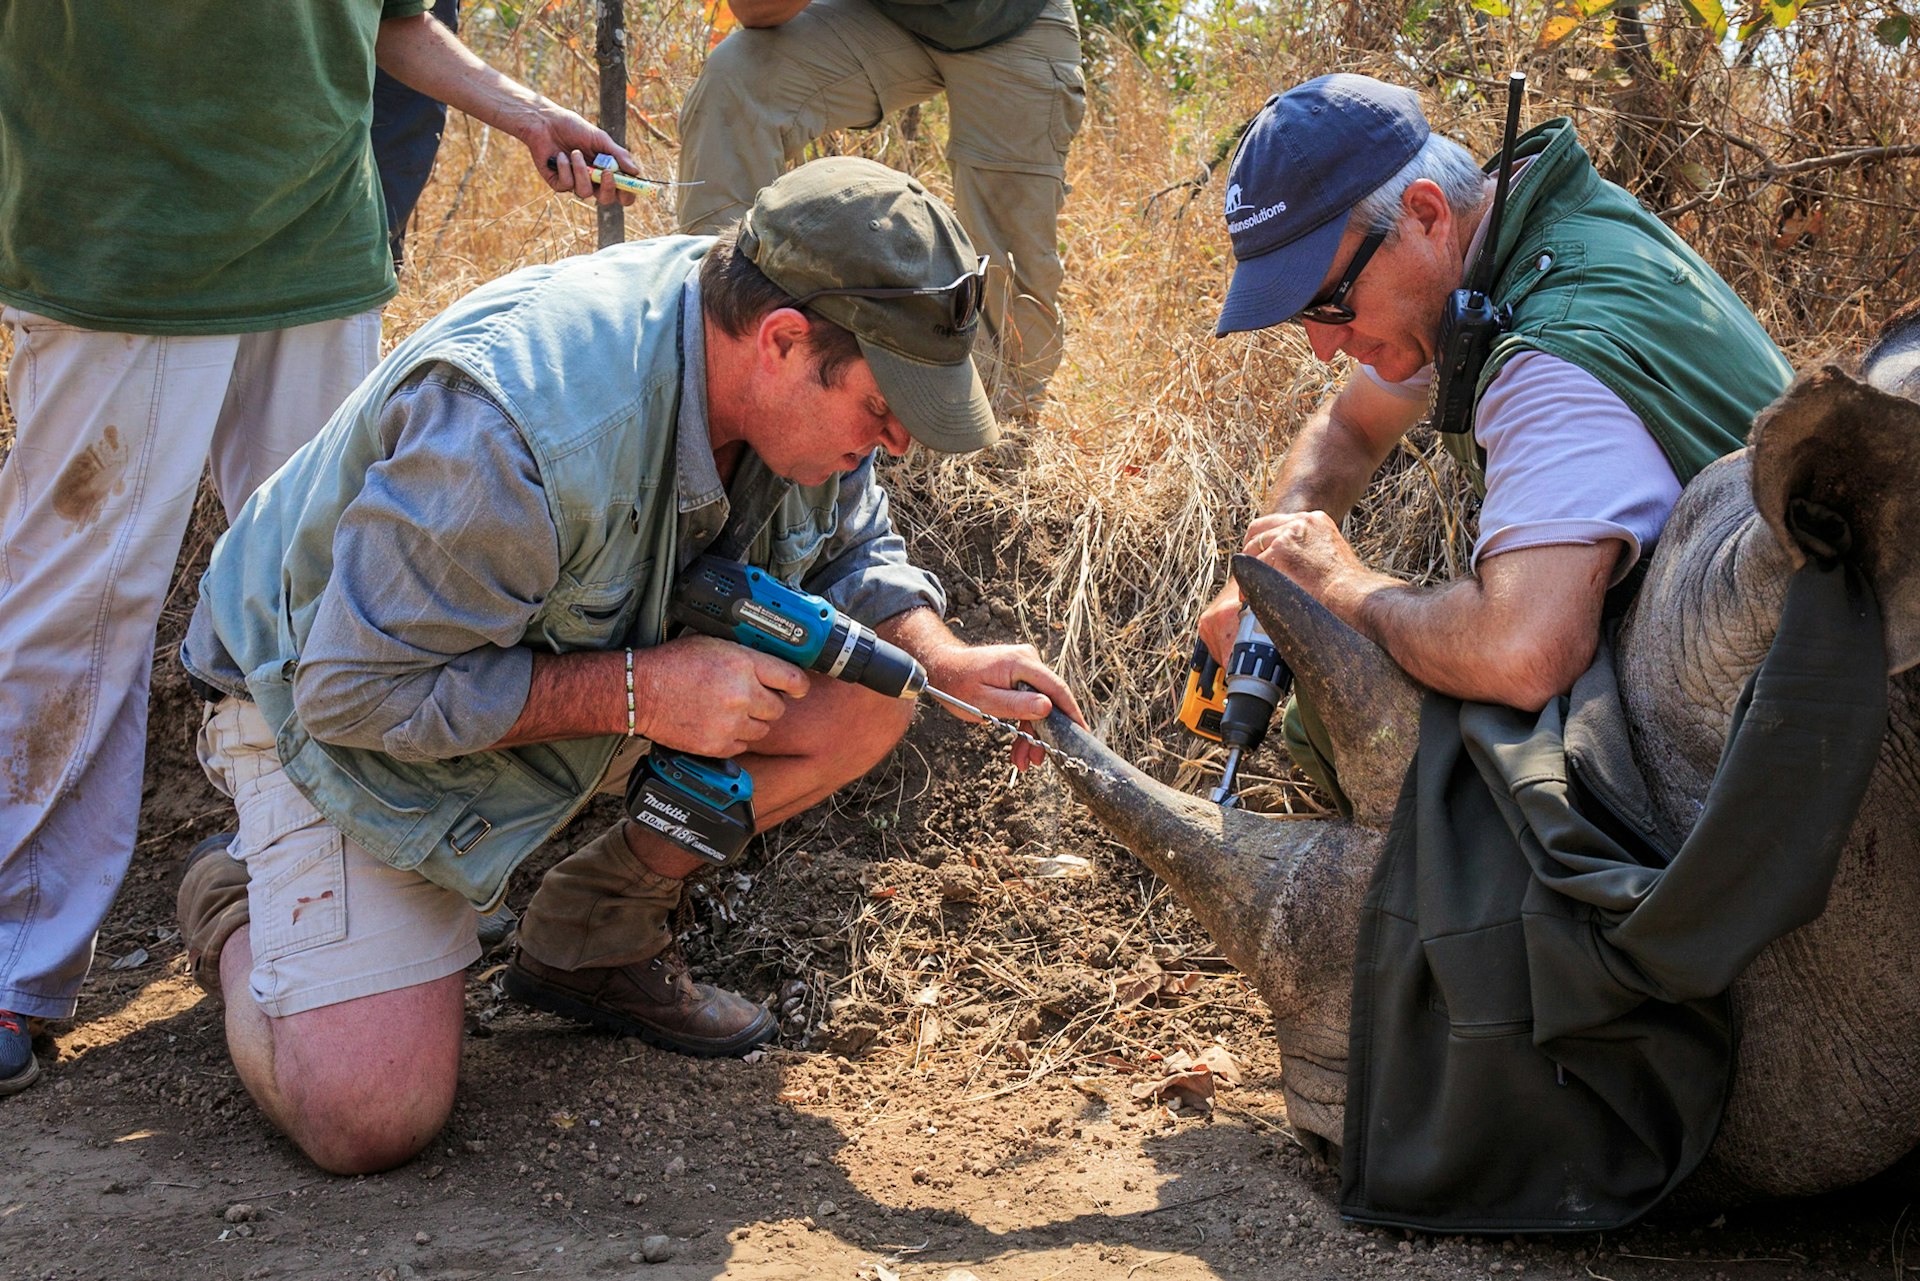 Two men drill into the horn of a tranquilized rhino